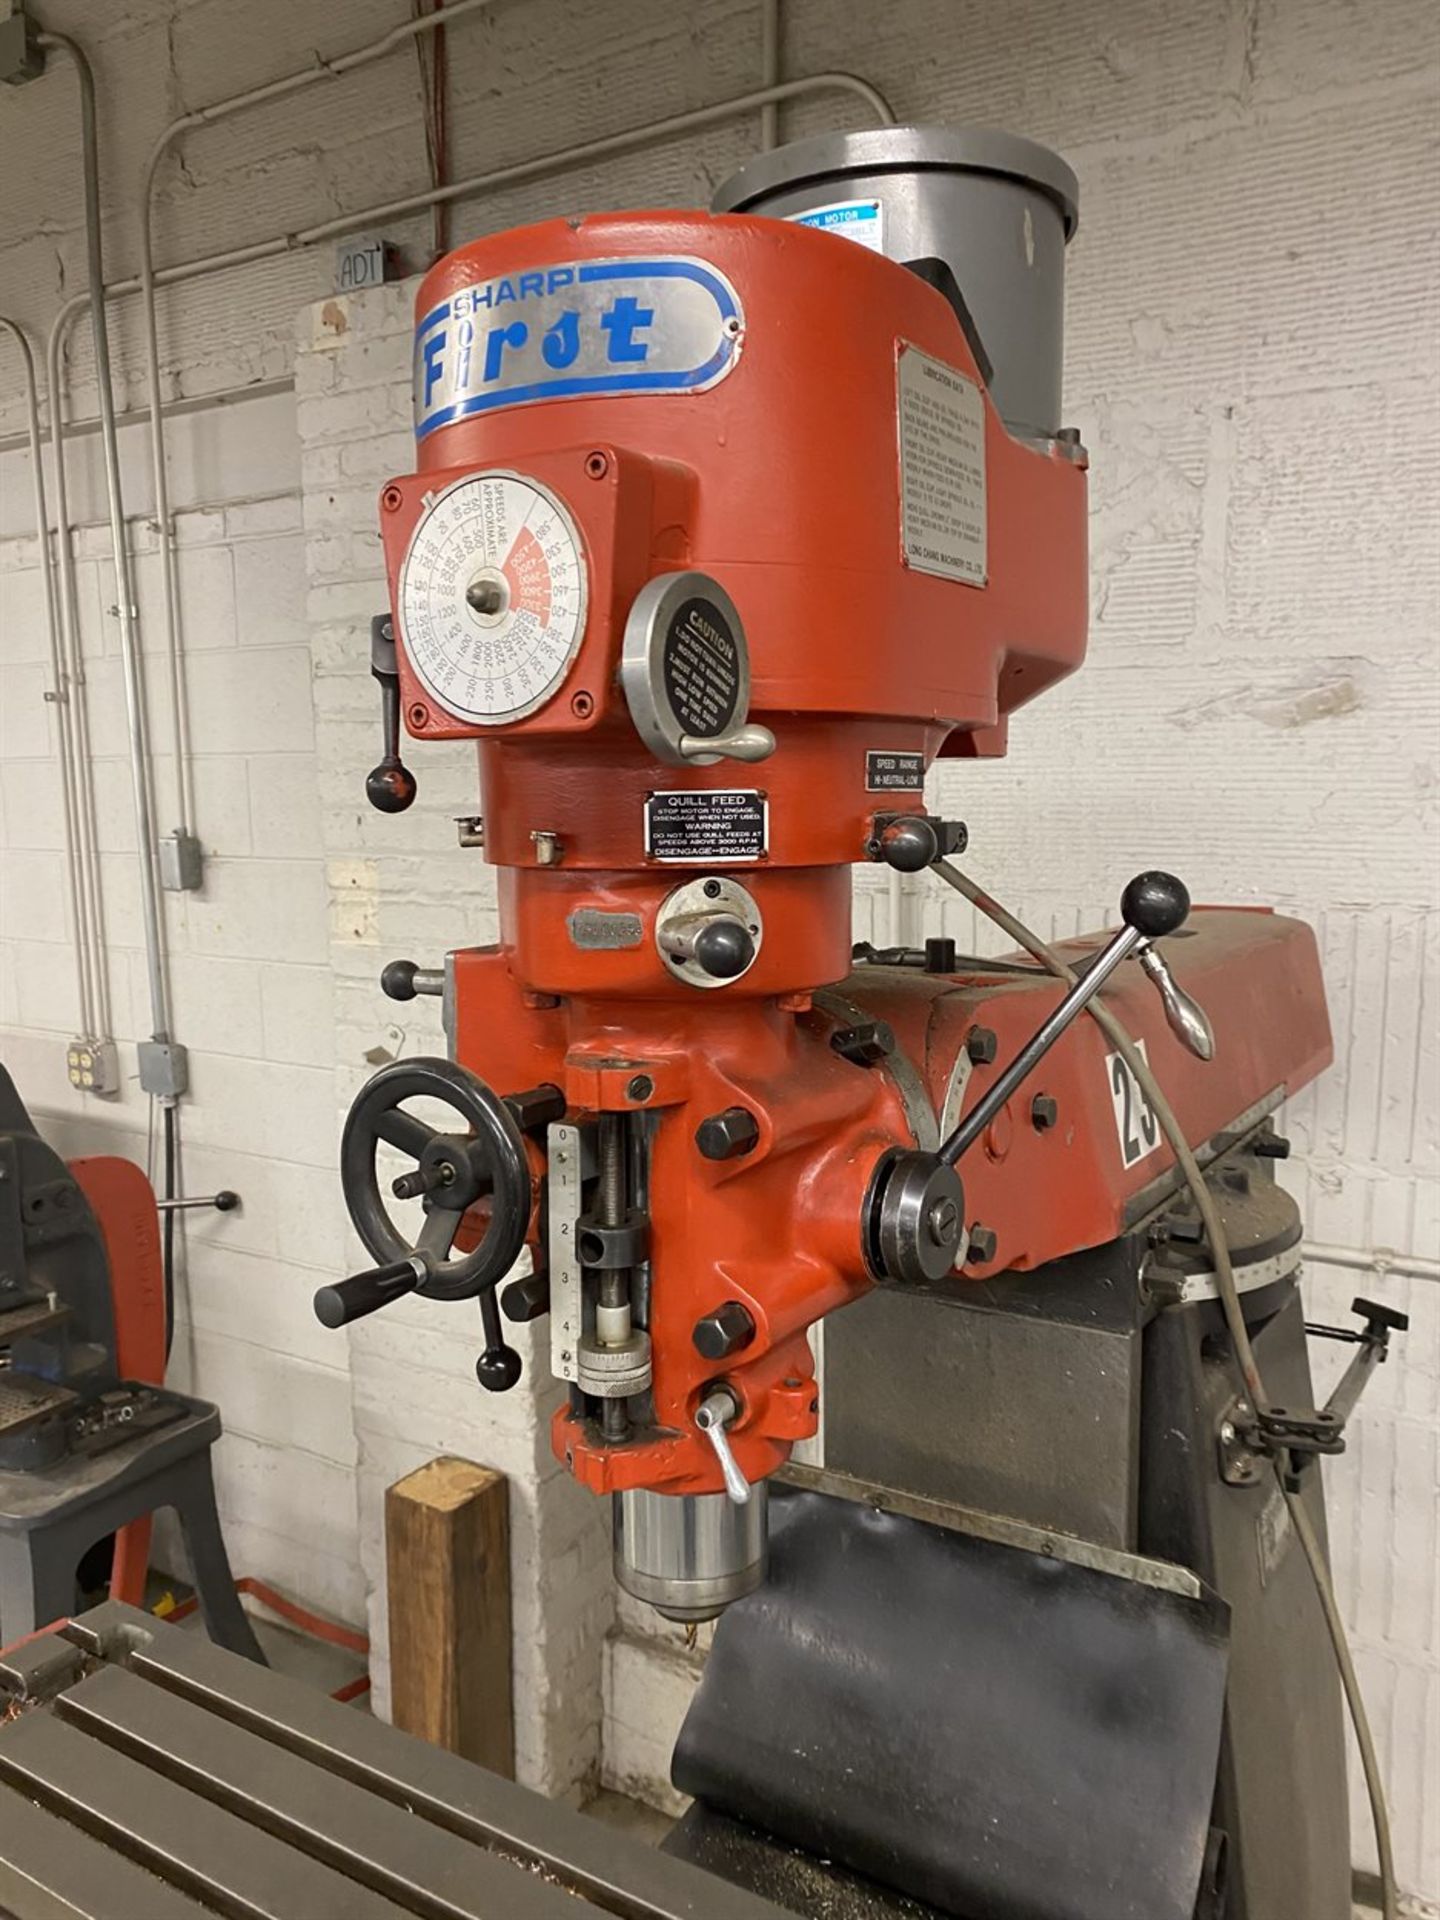 SHARP HCS Milling Machine, s/n 74080233, 9” x 48” Power Feed Table, 60-4500 RPM - Image 3 of 3